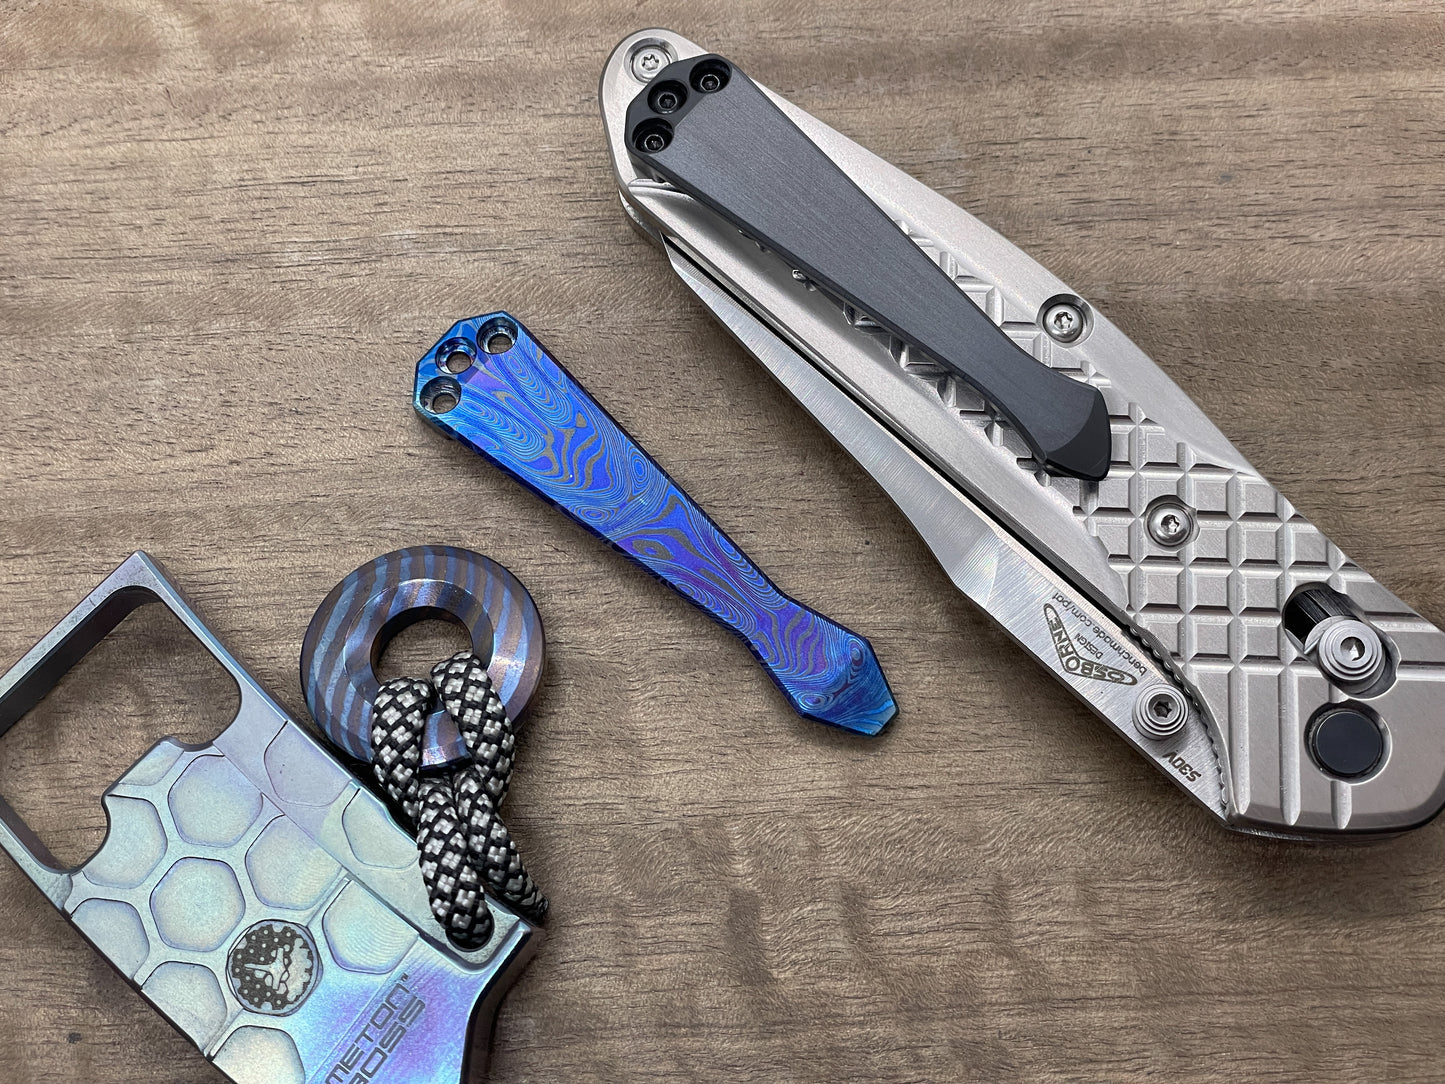 Dama FISH Flamed Dmd Titanium CLIP for most Benchmade models